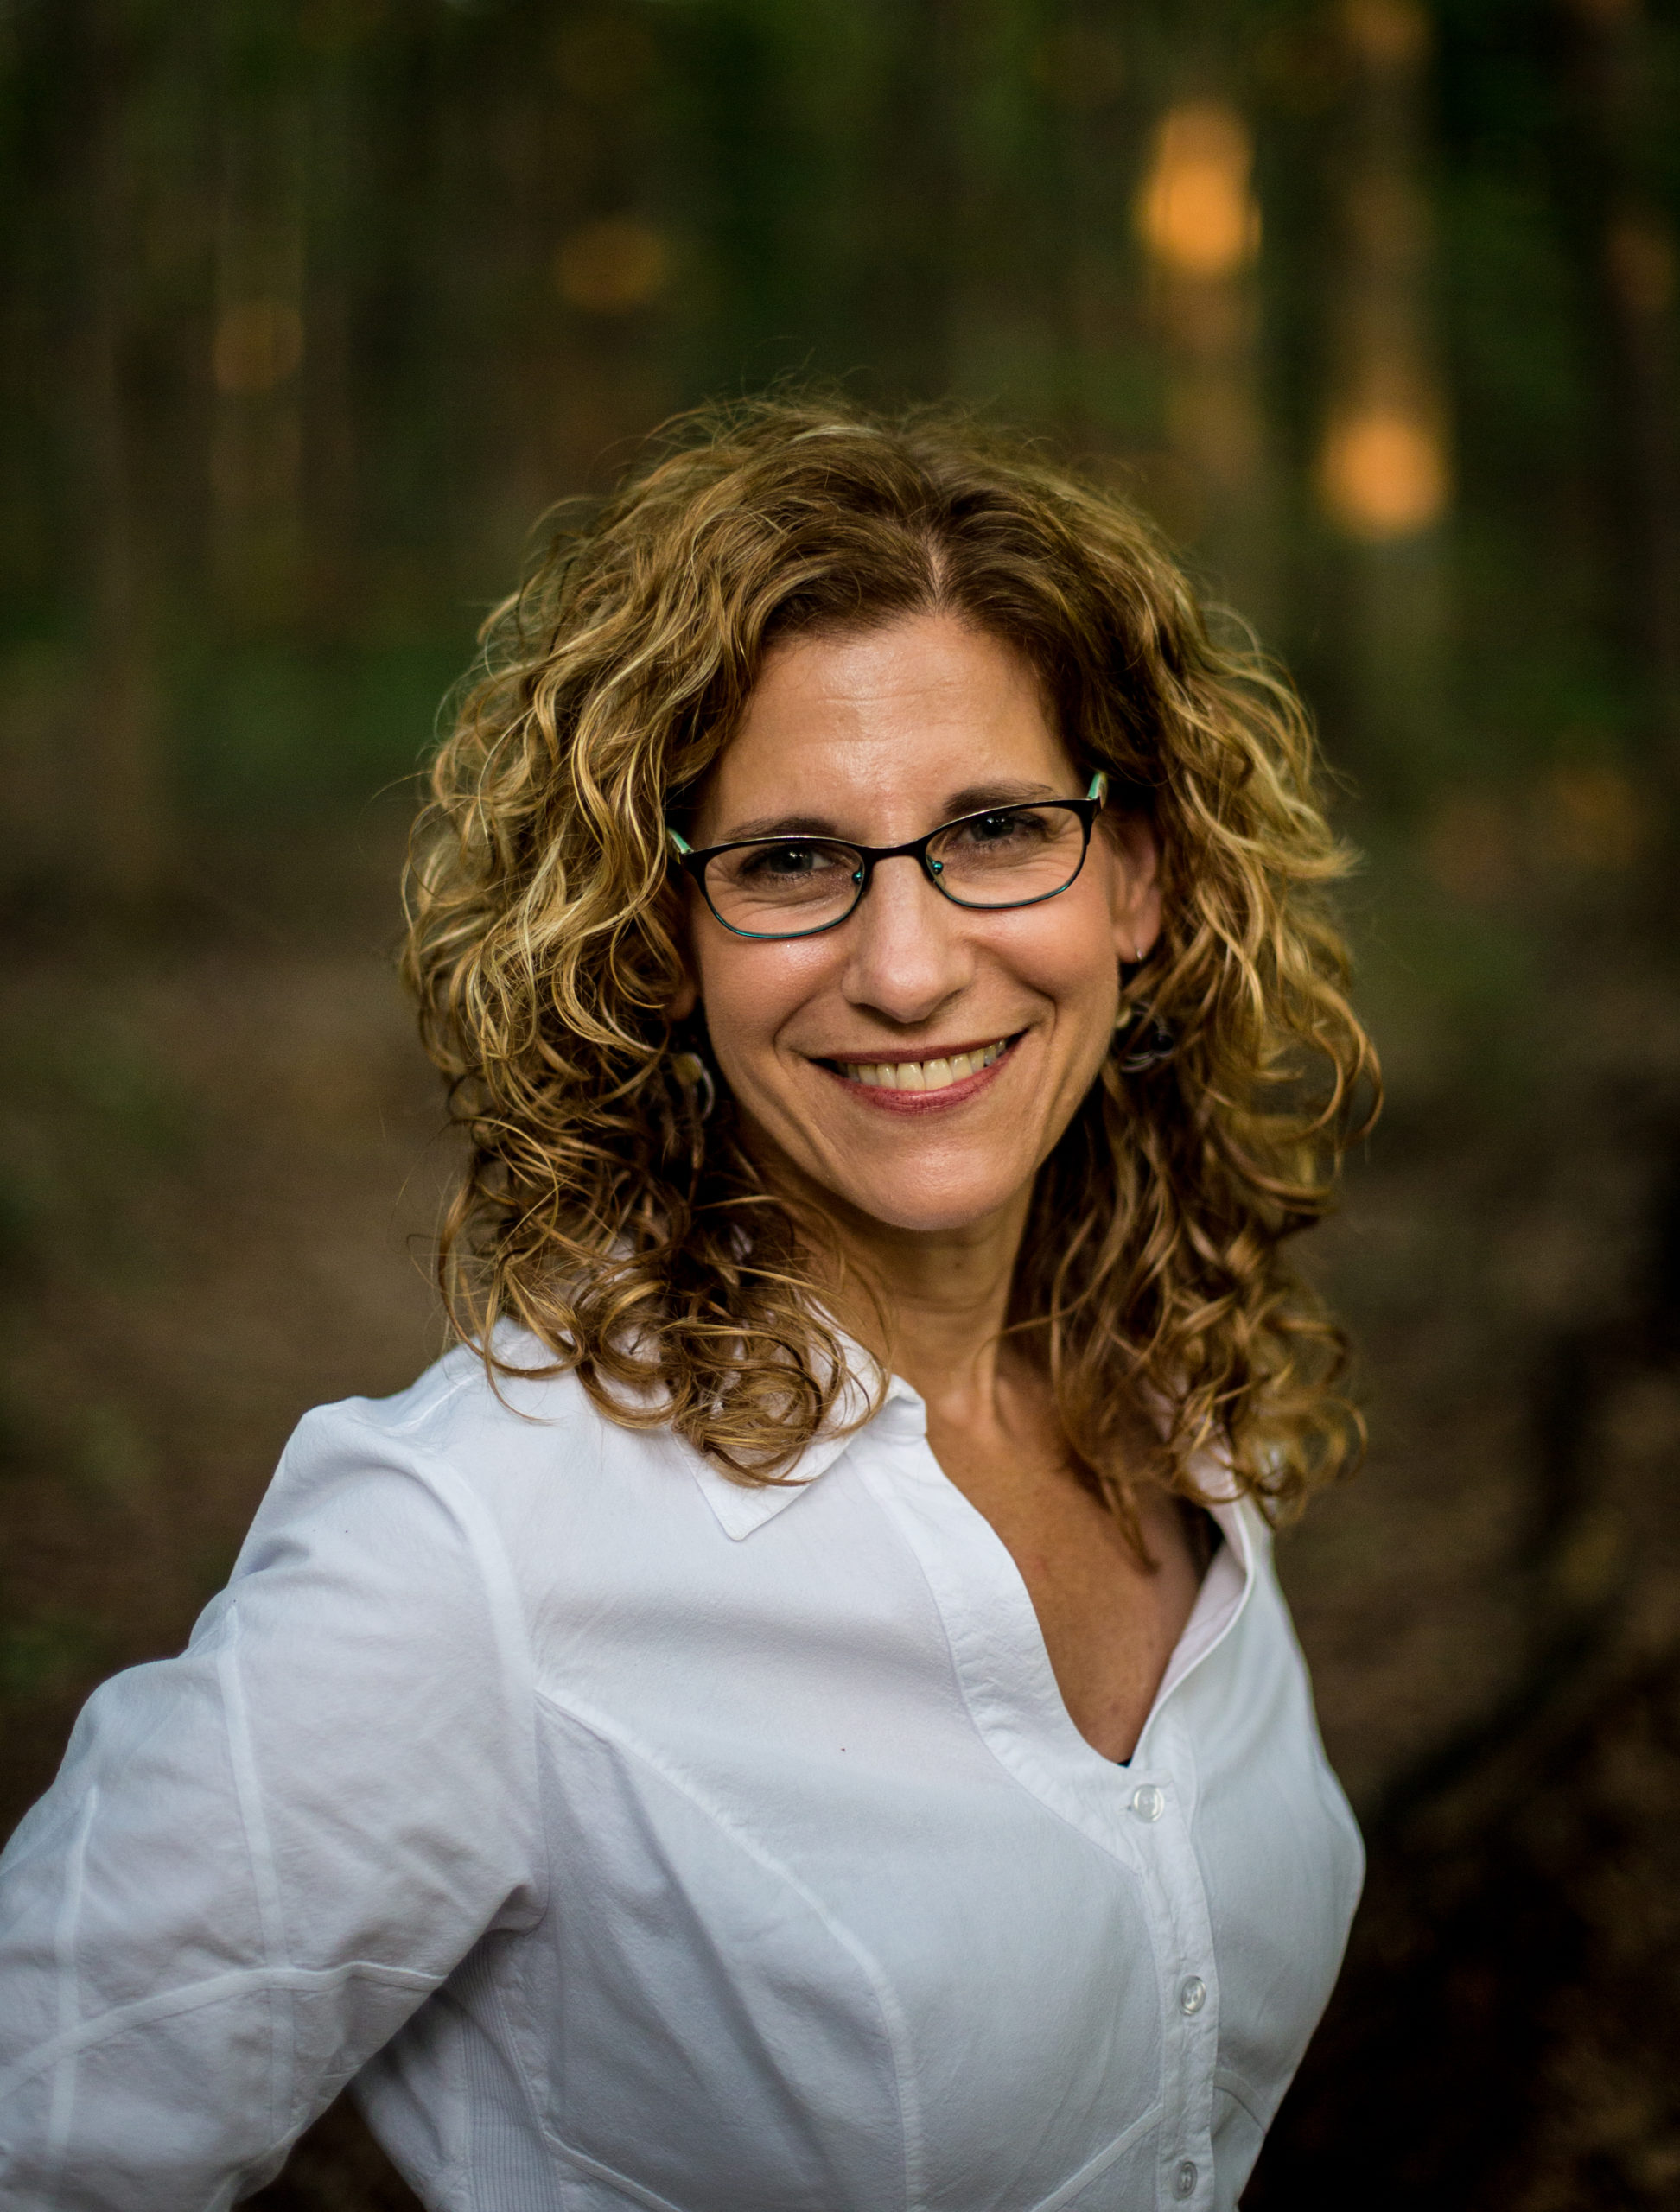 professional headshot of woman with curly hair and glasses smiling at the camera